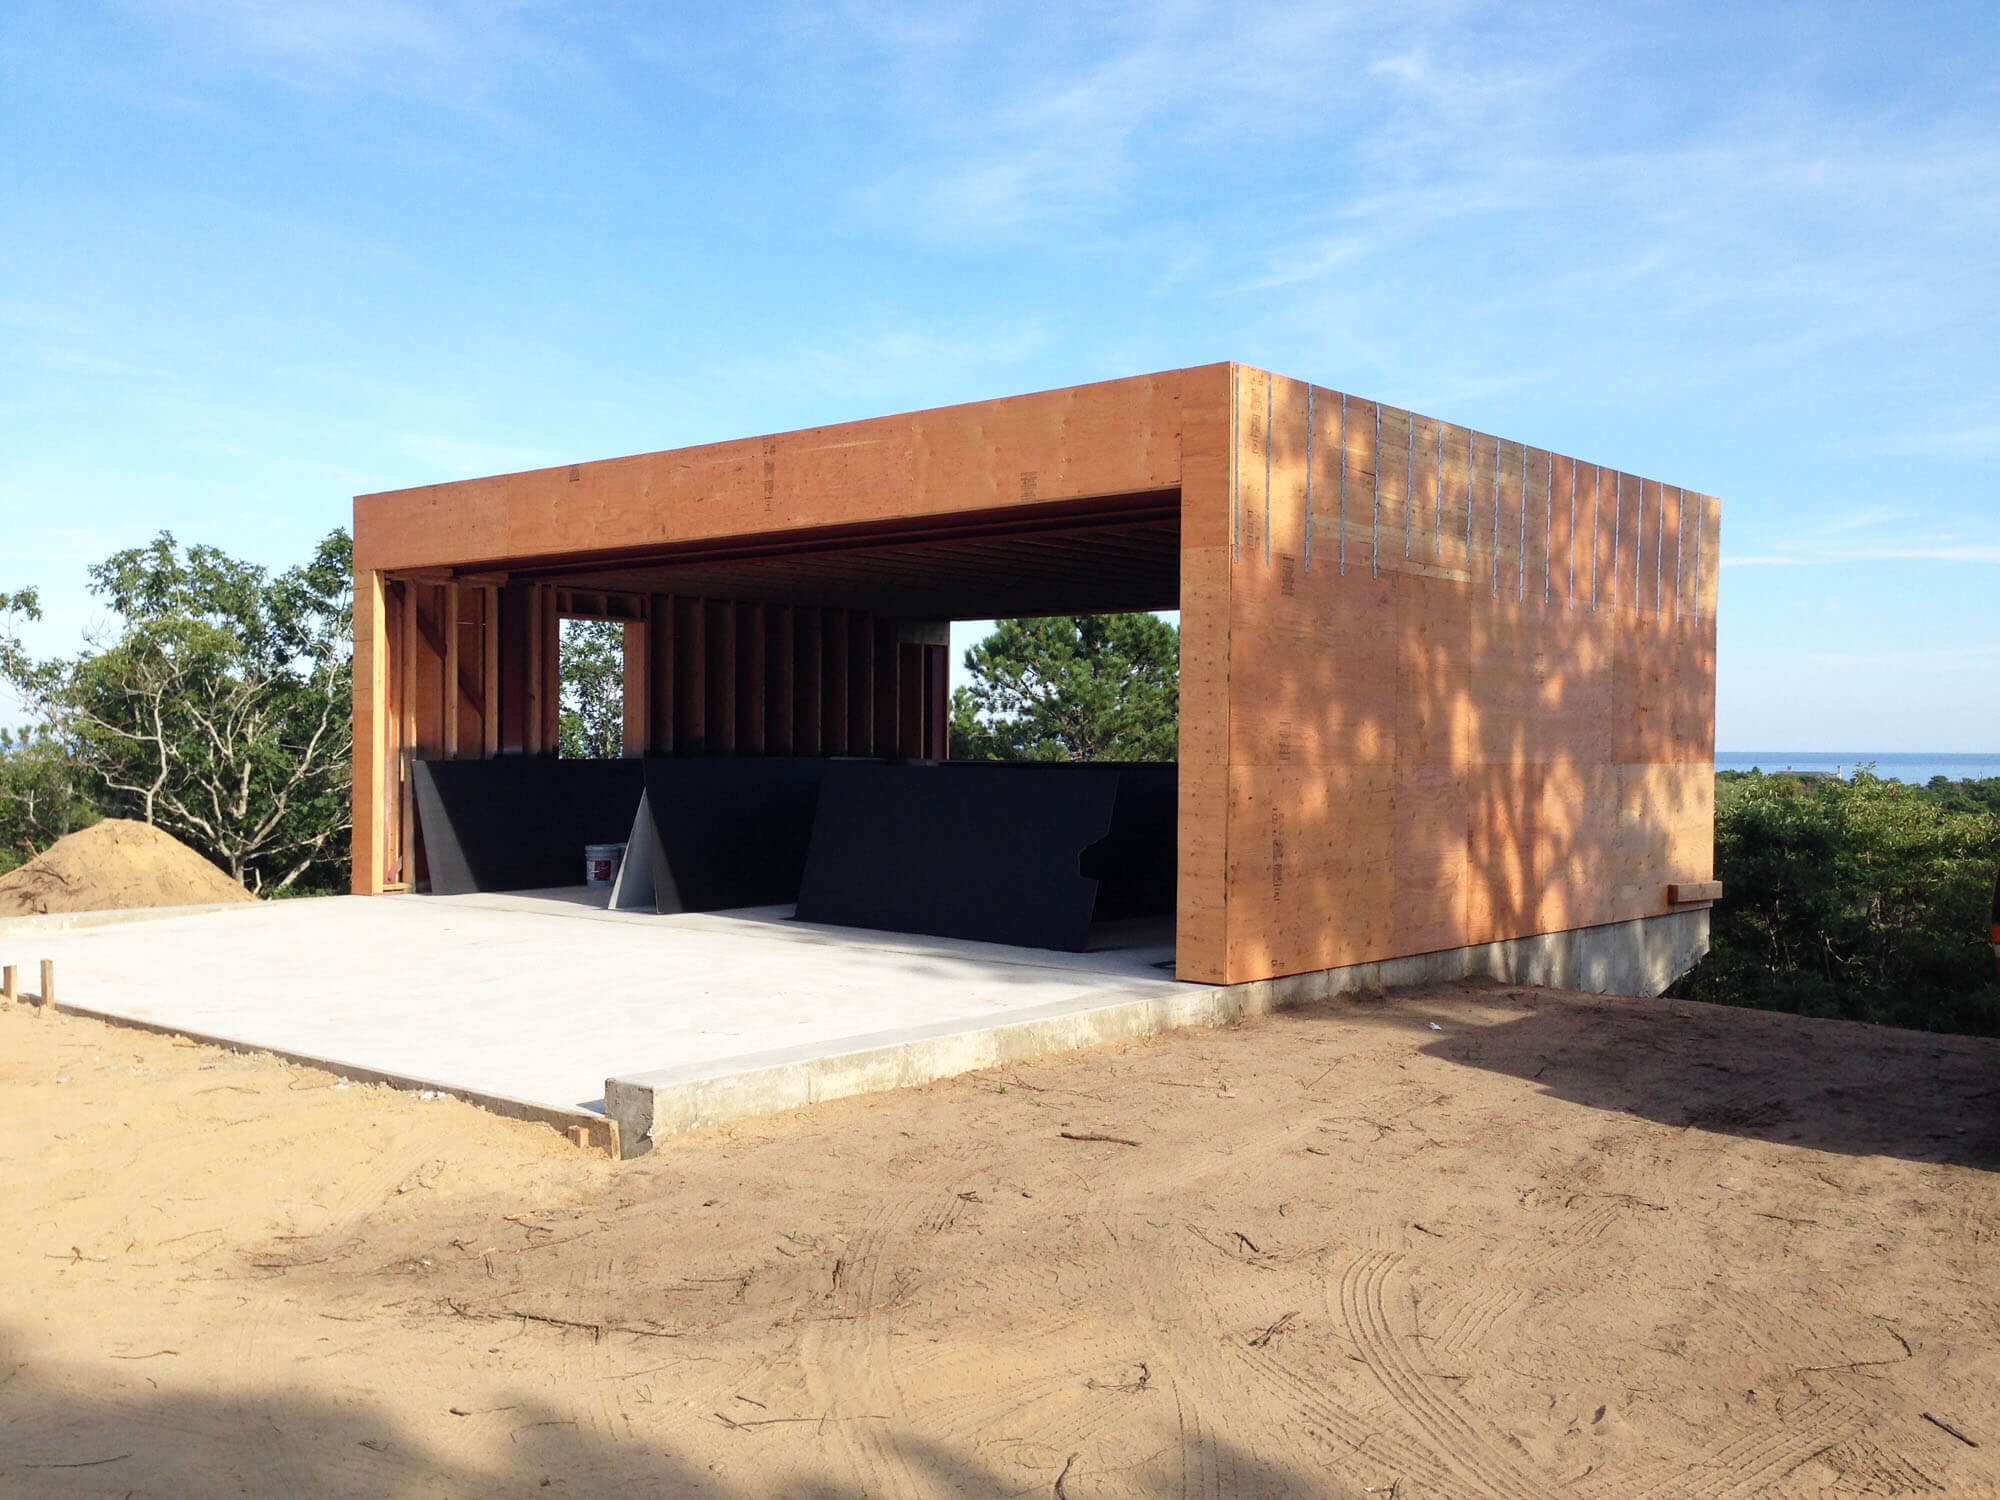   Detached Garage -&nbsp;  Steel framing and exterior sheathing has been completed.  